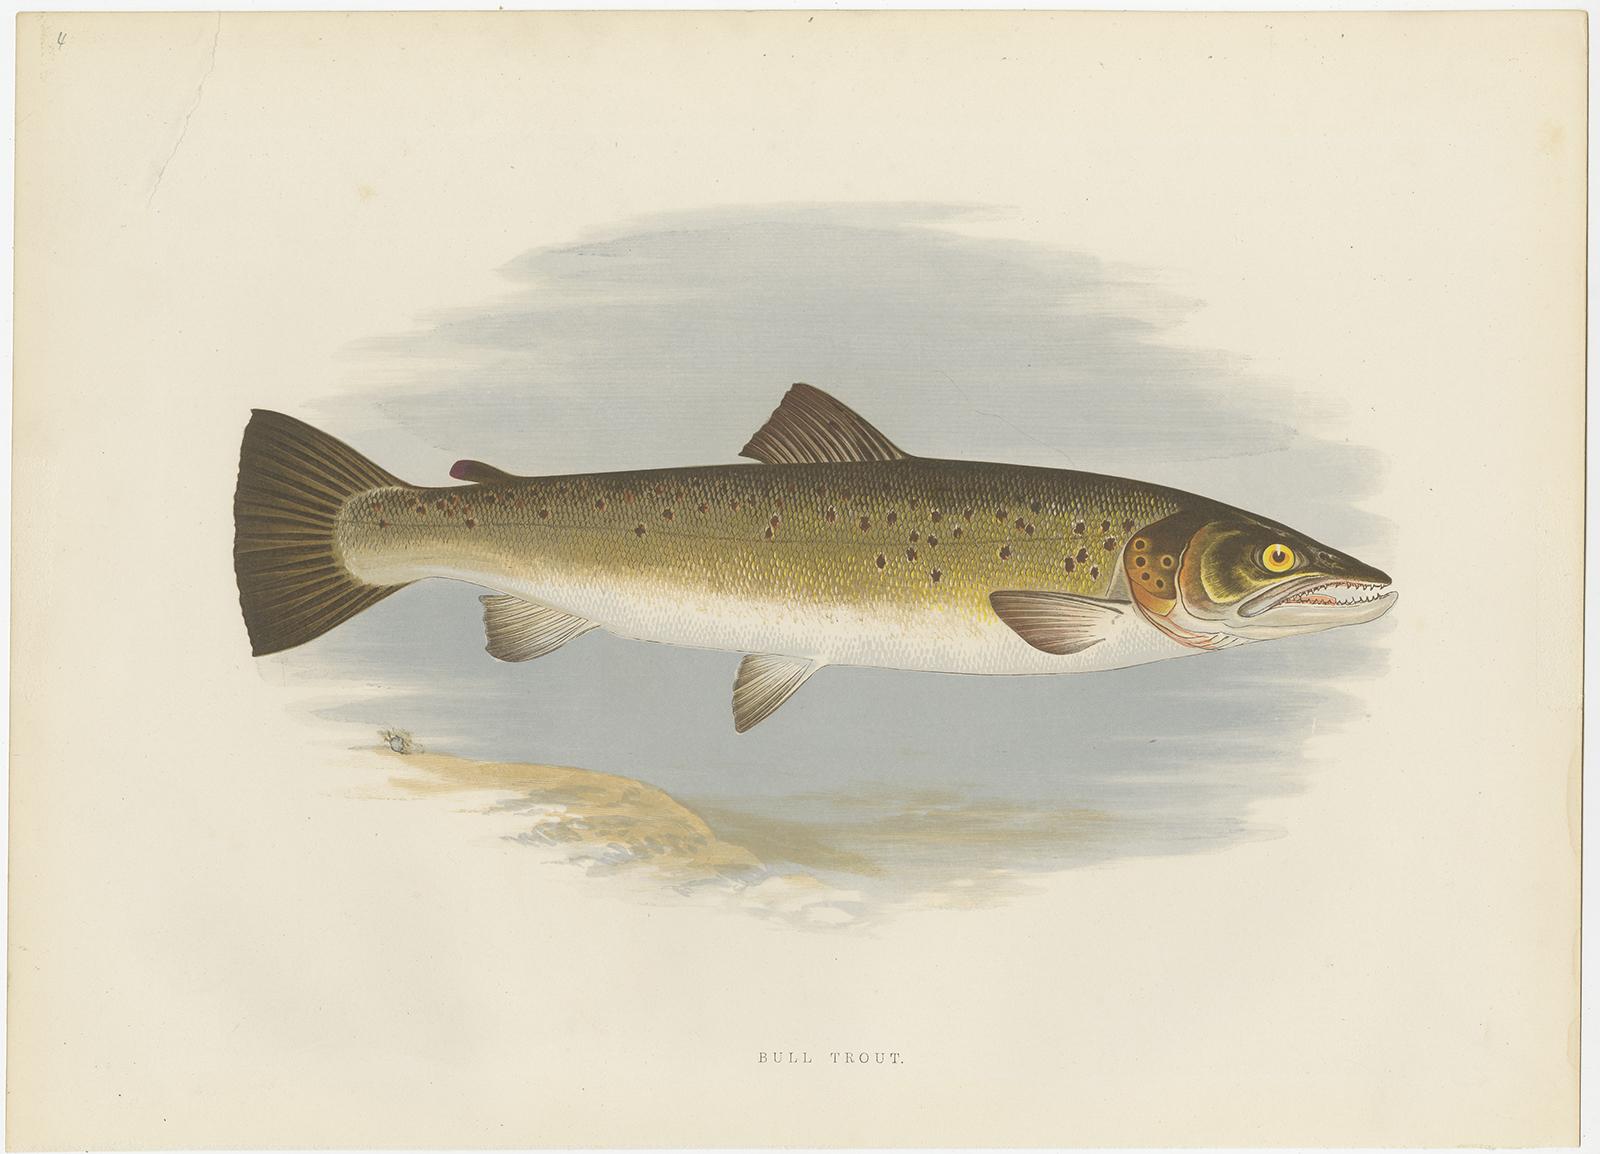 Set of two fish prints titled 'Bull Trout' and 'Salmon Trout'. Lithographs of the bull trout and salmon trout. These prints originate from 'British fresh water fishes / by Rev. W. Houghton'.